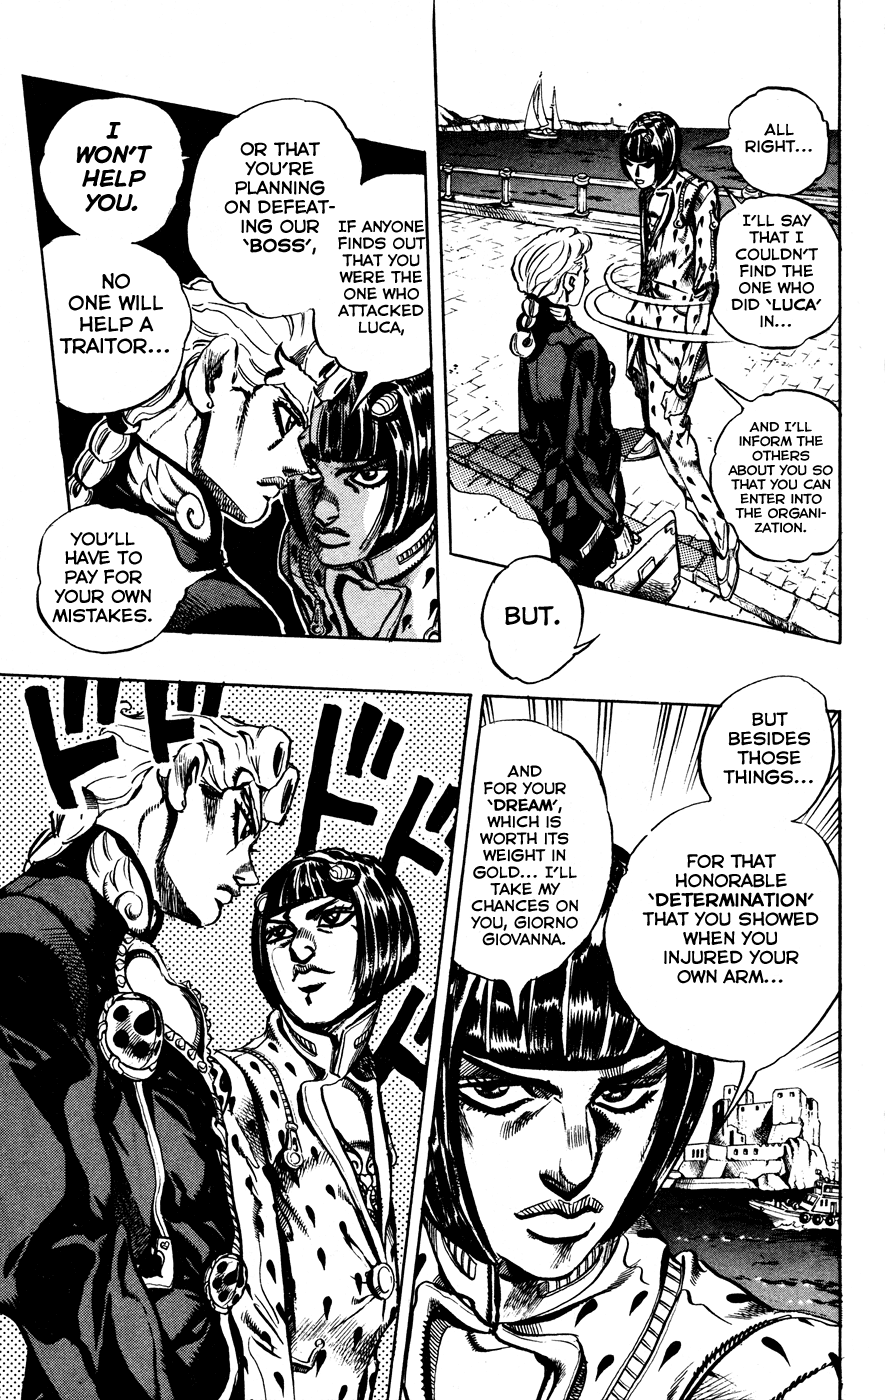 Jojo's Bizarre Adventure Part 5 - Vento Aureo Vol.2 Chapter 9: Meet The Gangster Behind The Wall Part 1 - Picture 3